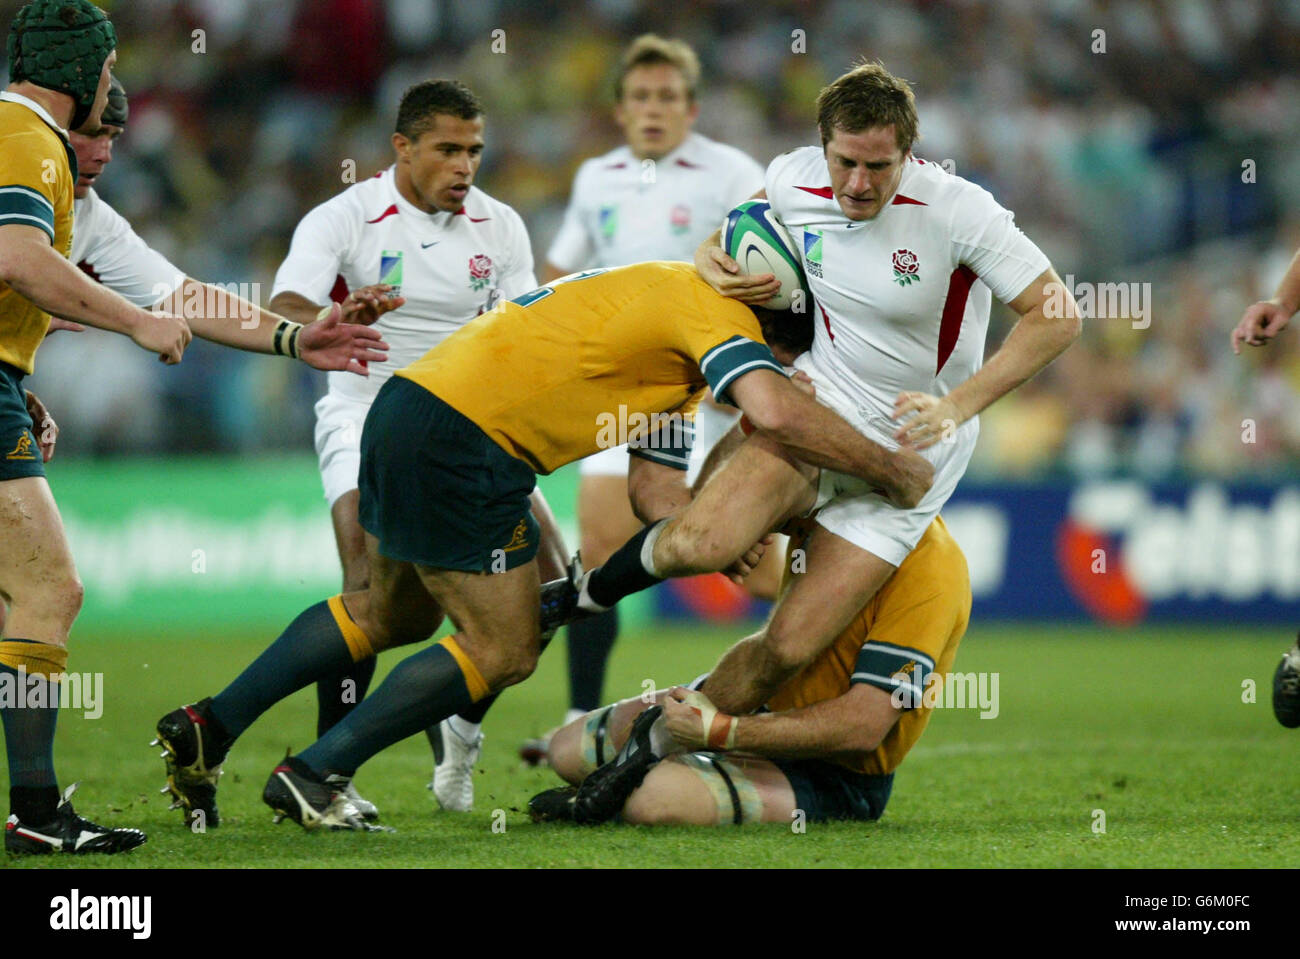 England's Will Greenwood (right) is tackled by Brendan Cannon and David Lyons during the Rugby World Cup Final at the Telstra Stadium, Sydney, Australia. England won 20-17 after extra-time. No mobile phone use, Internet sites may only use one image every five minutes during match Stock Photo